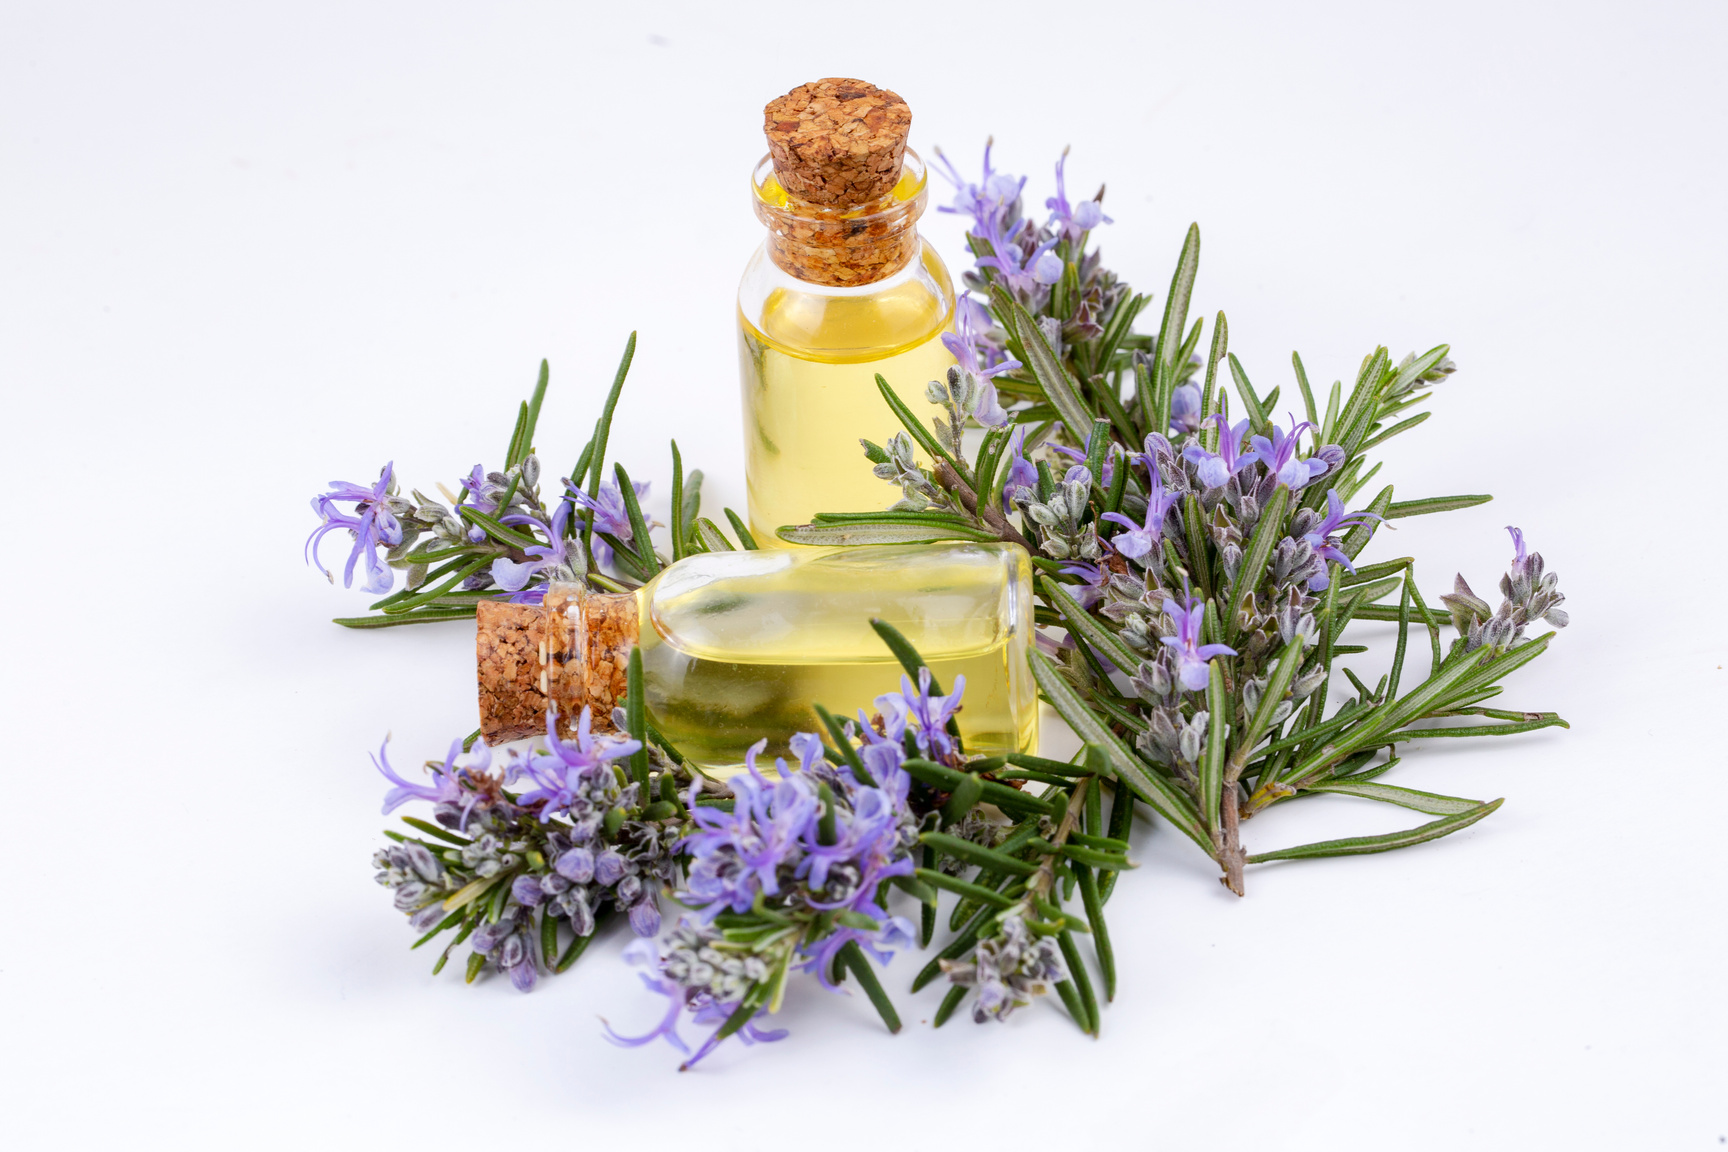 Rosemary essential oil in a small bottle. Natural aroma cosmetic oil